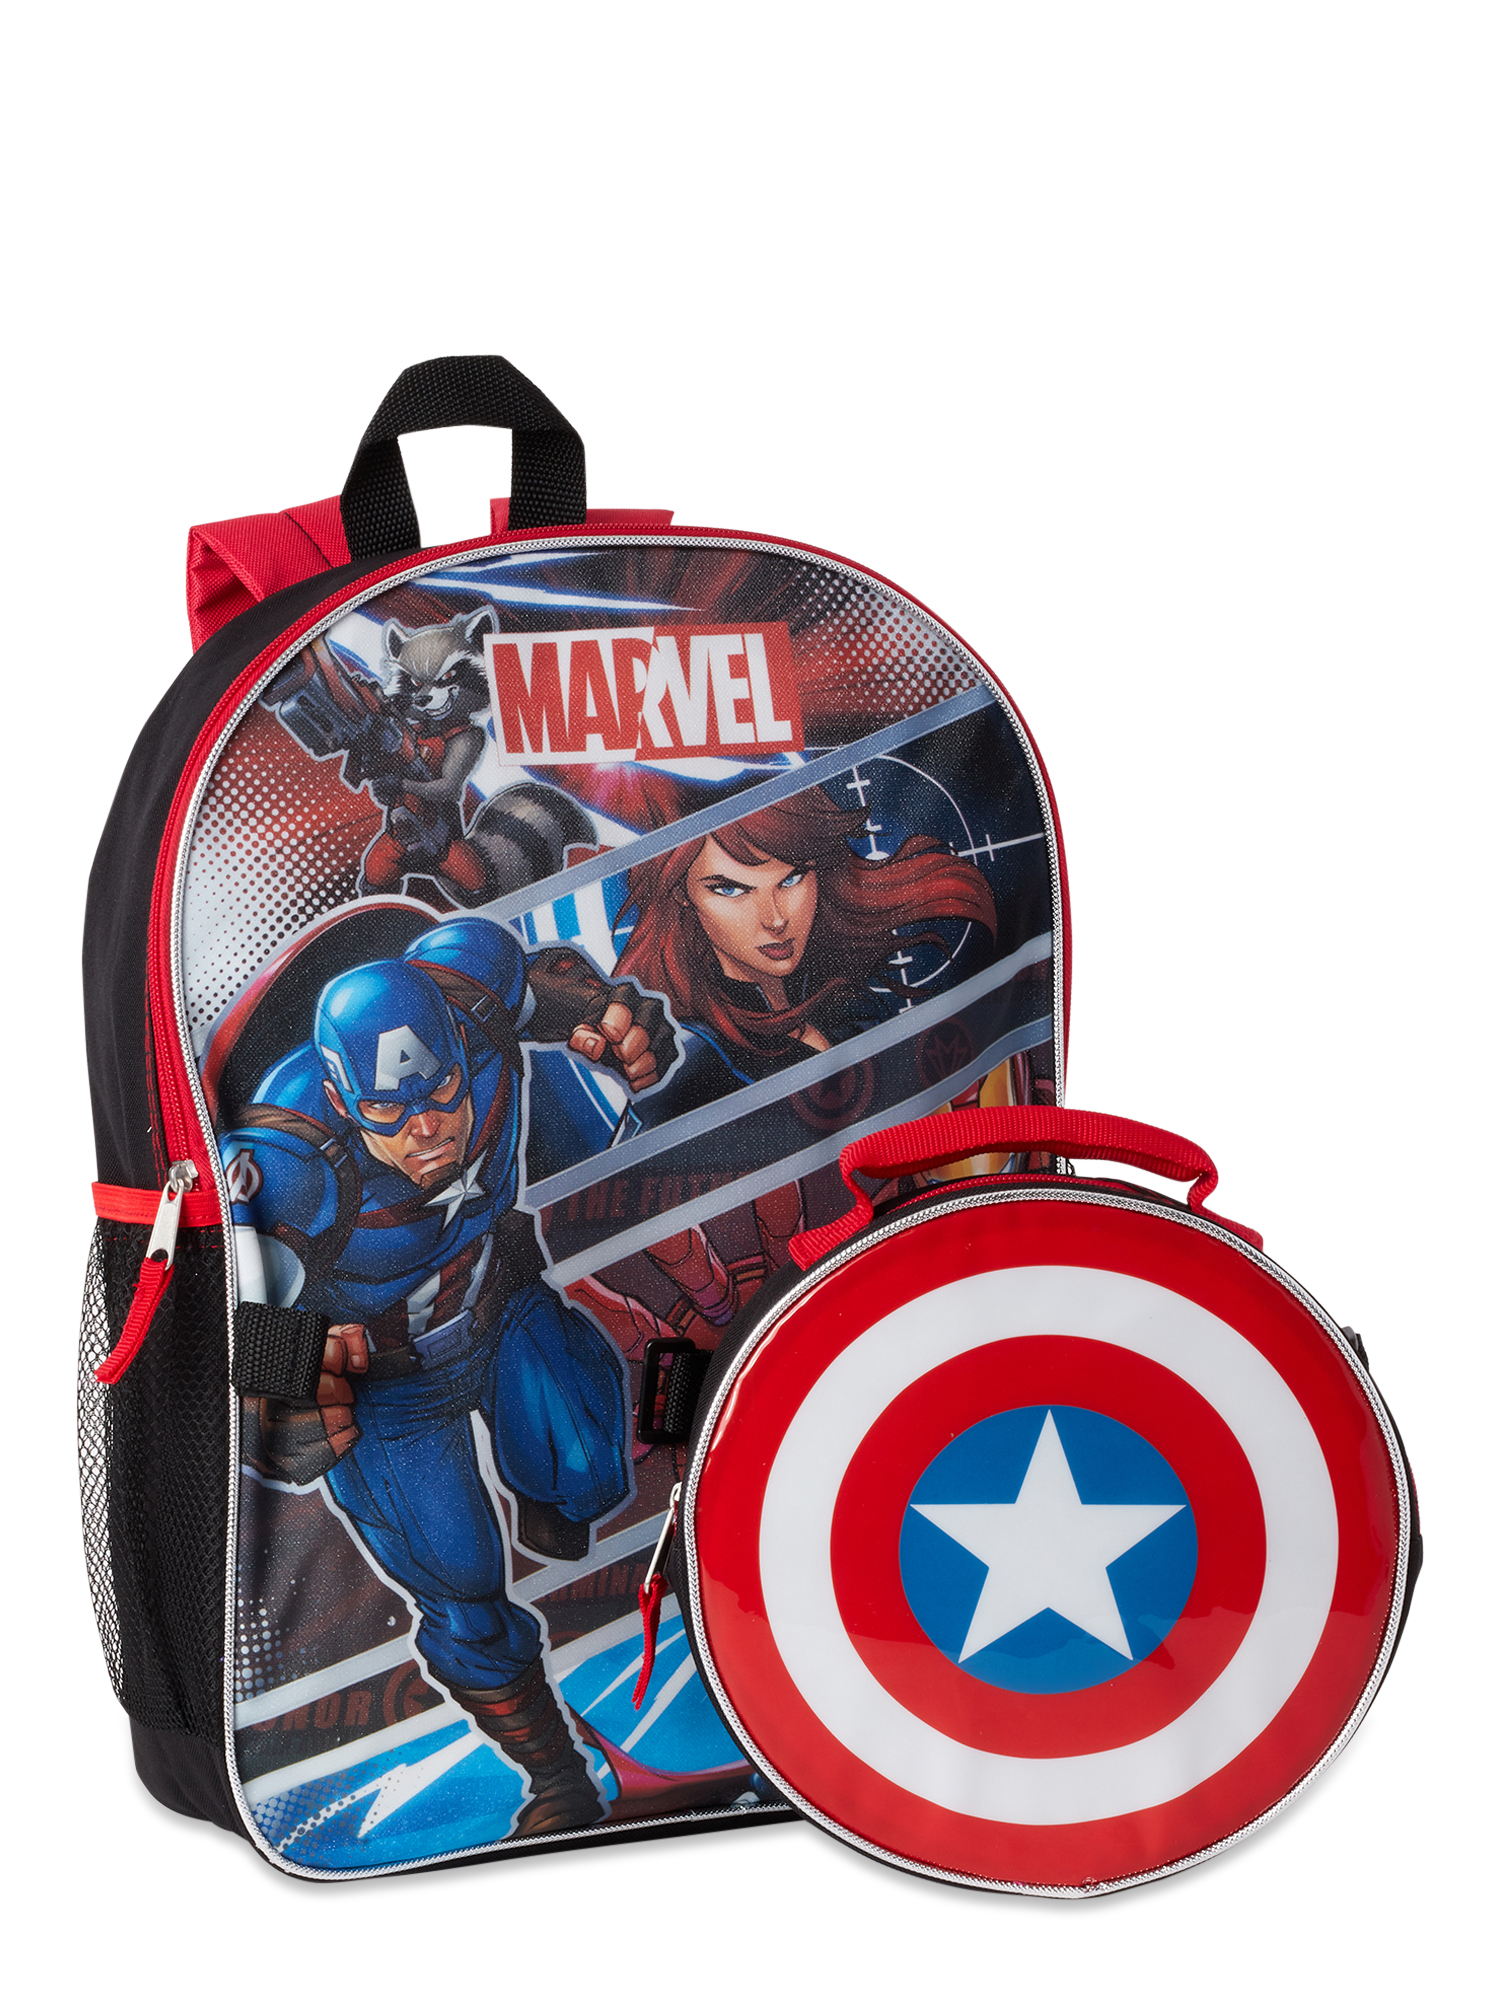 Marvel Captain America Backpack with Lunch - image 1 of 4